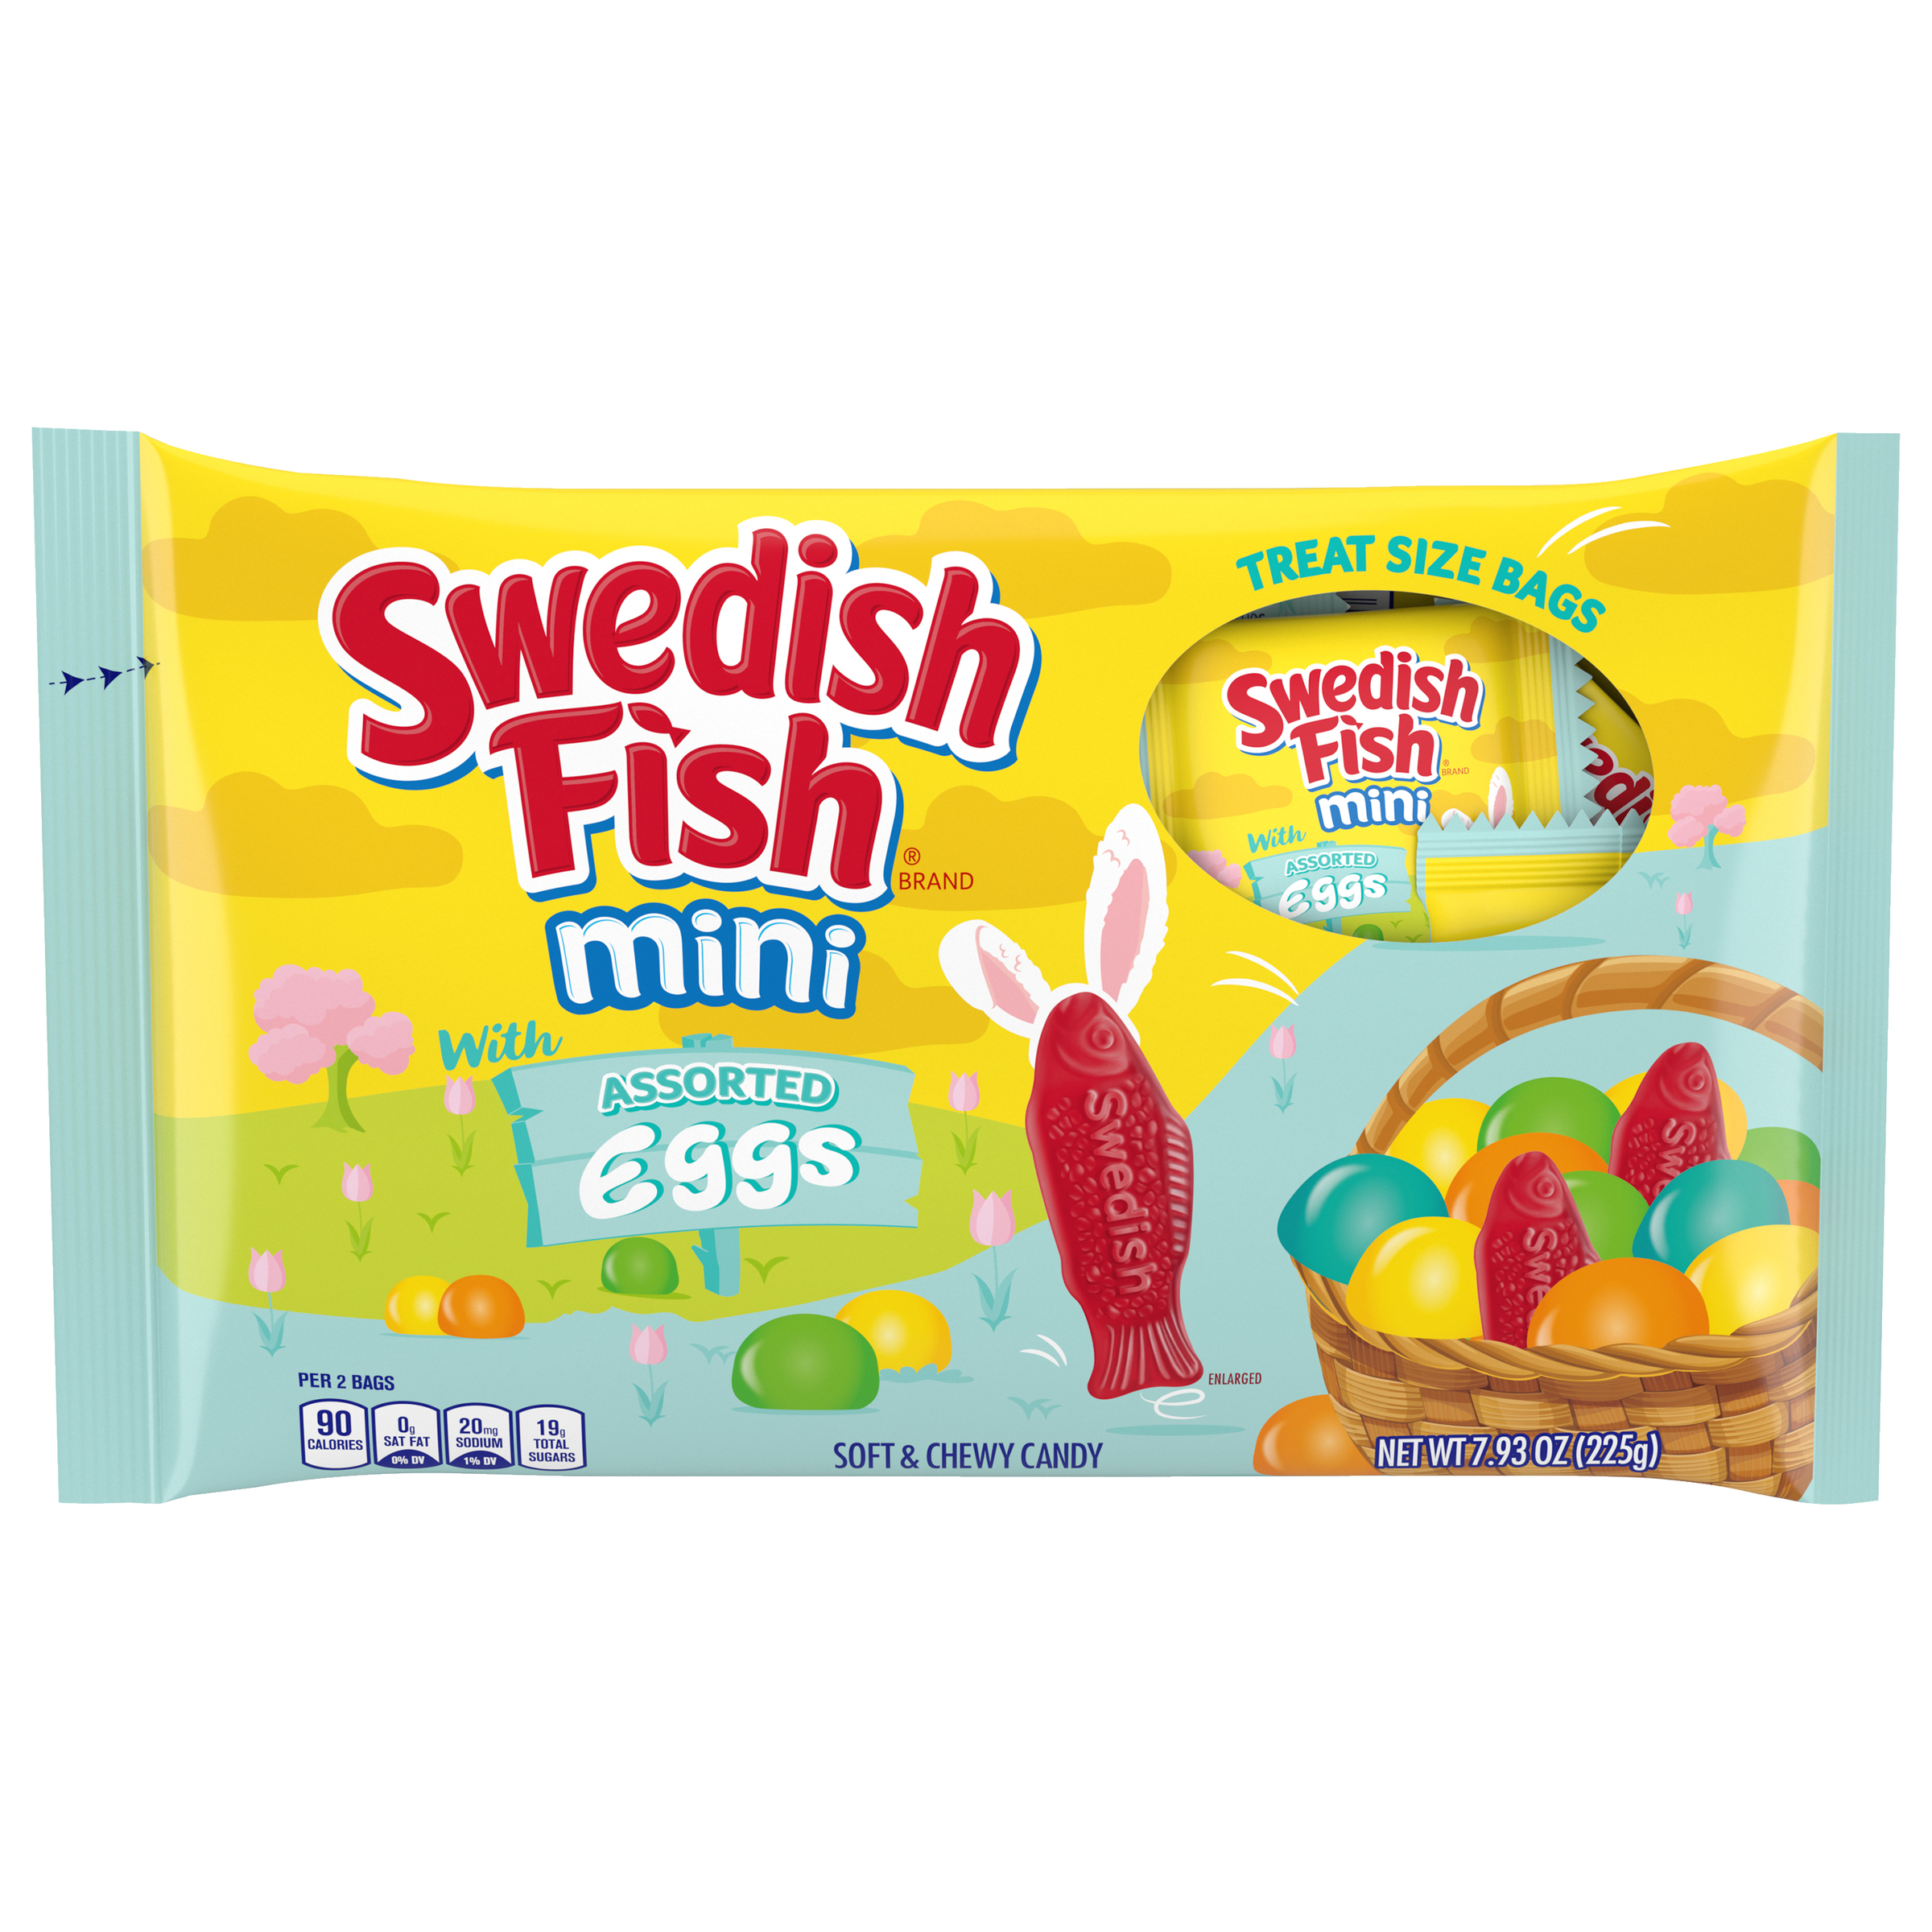 SWEDISH FISH Mini with Assorted Eggs Soft & Chewy Easter Candy, 18 Snack Packs